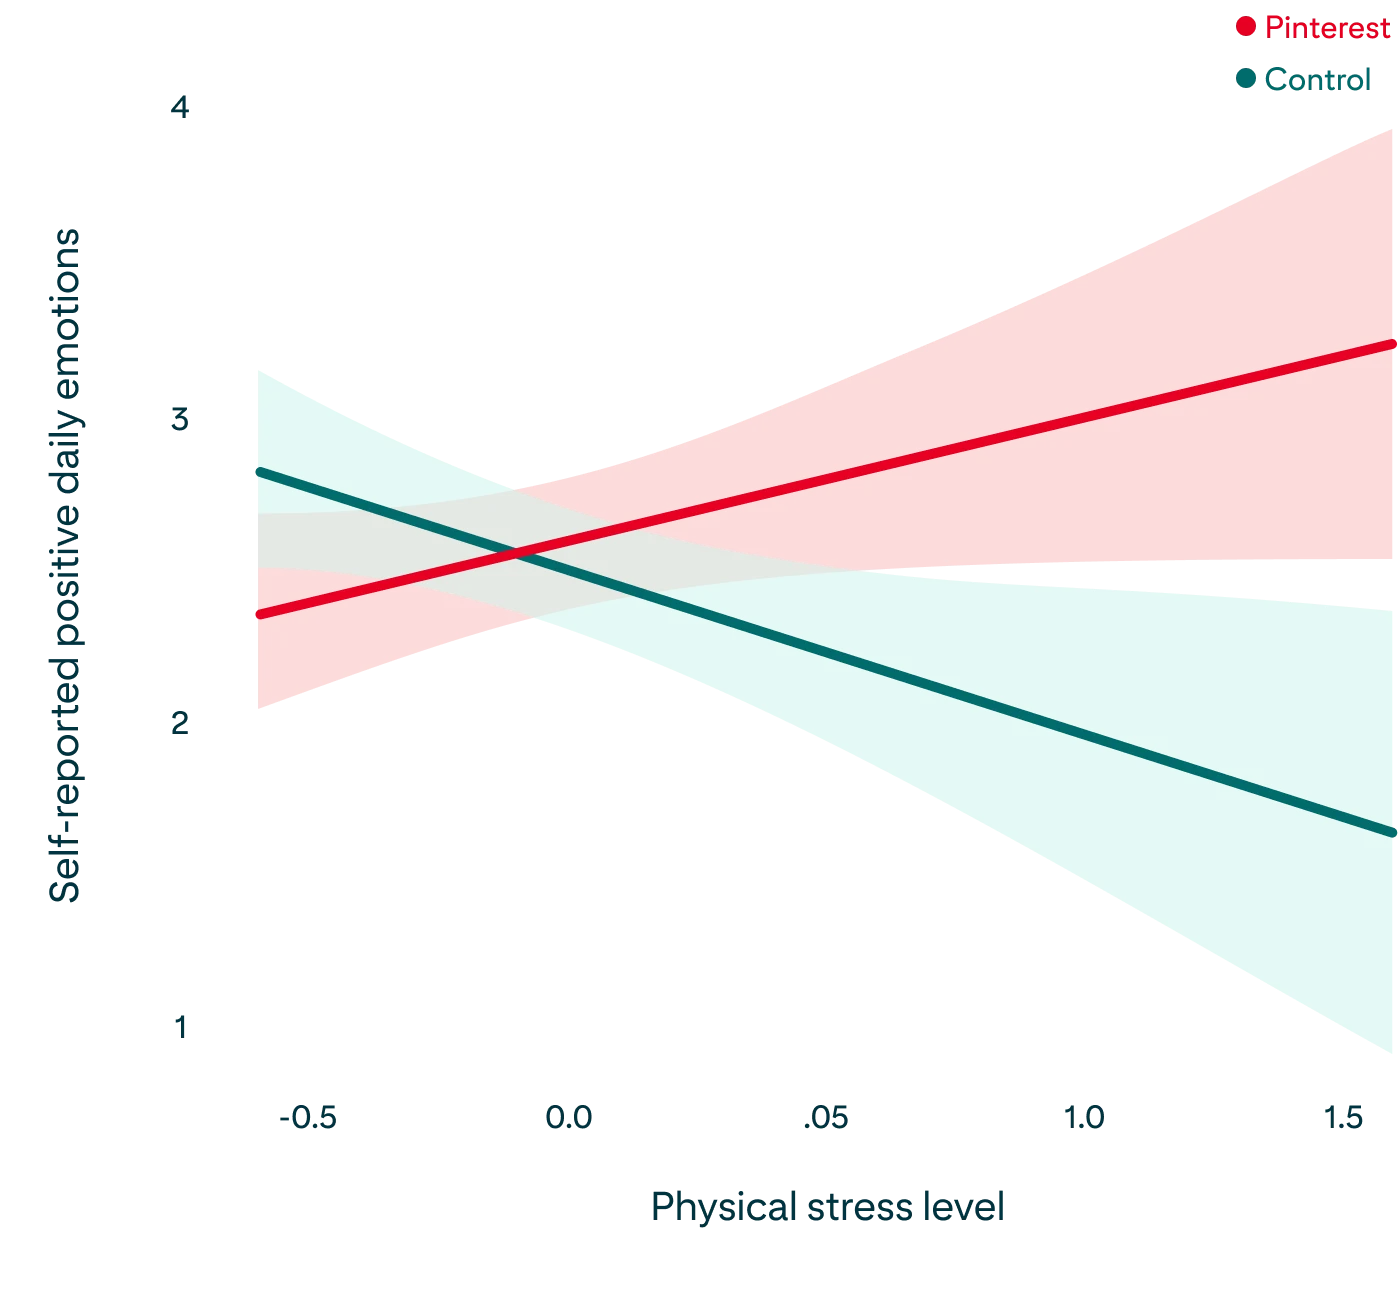  Chart showing the relationship between physical stress factors and self-reported positive emotions, as described in the paragraph above 